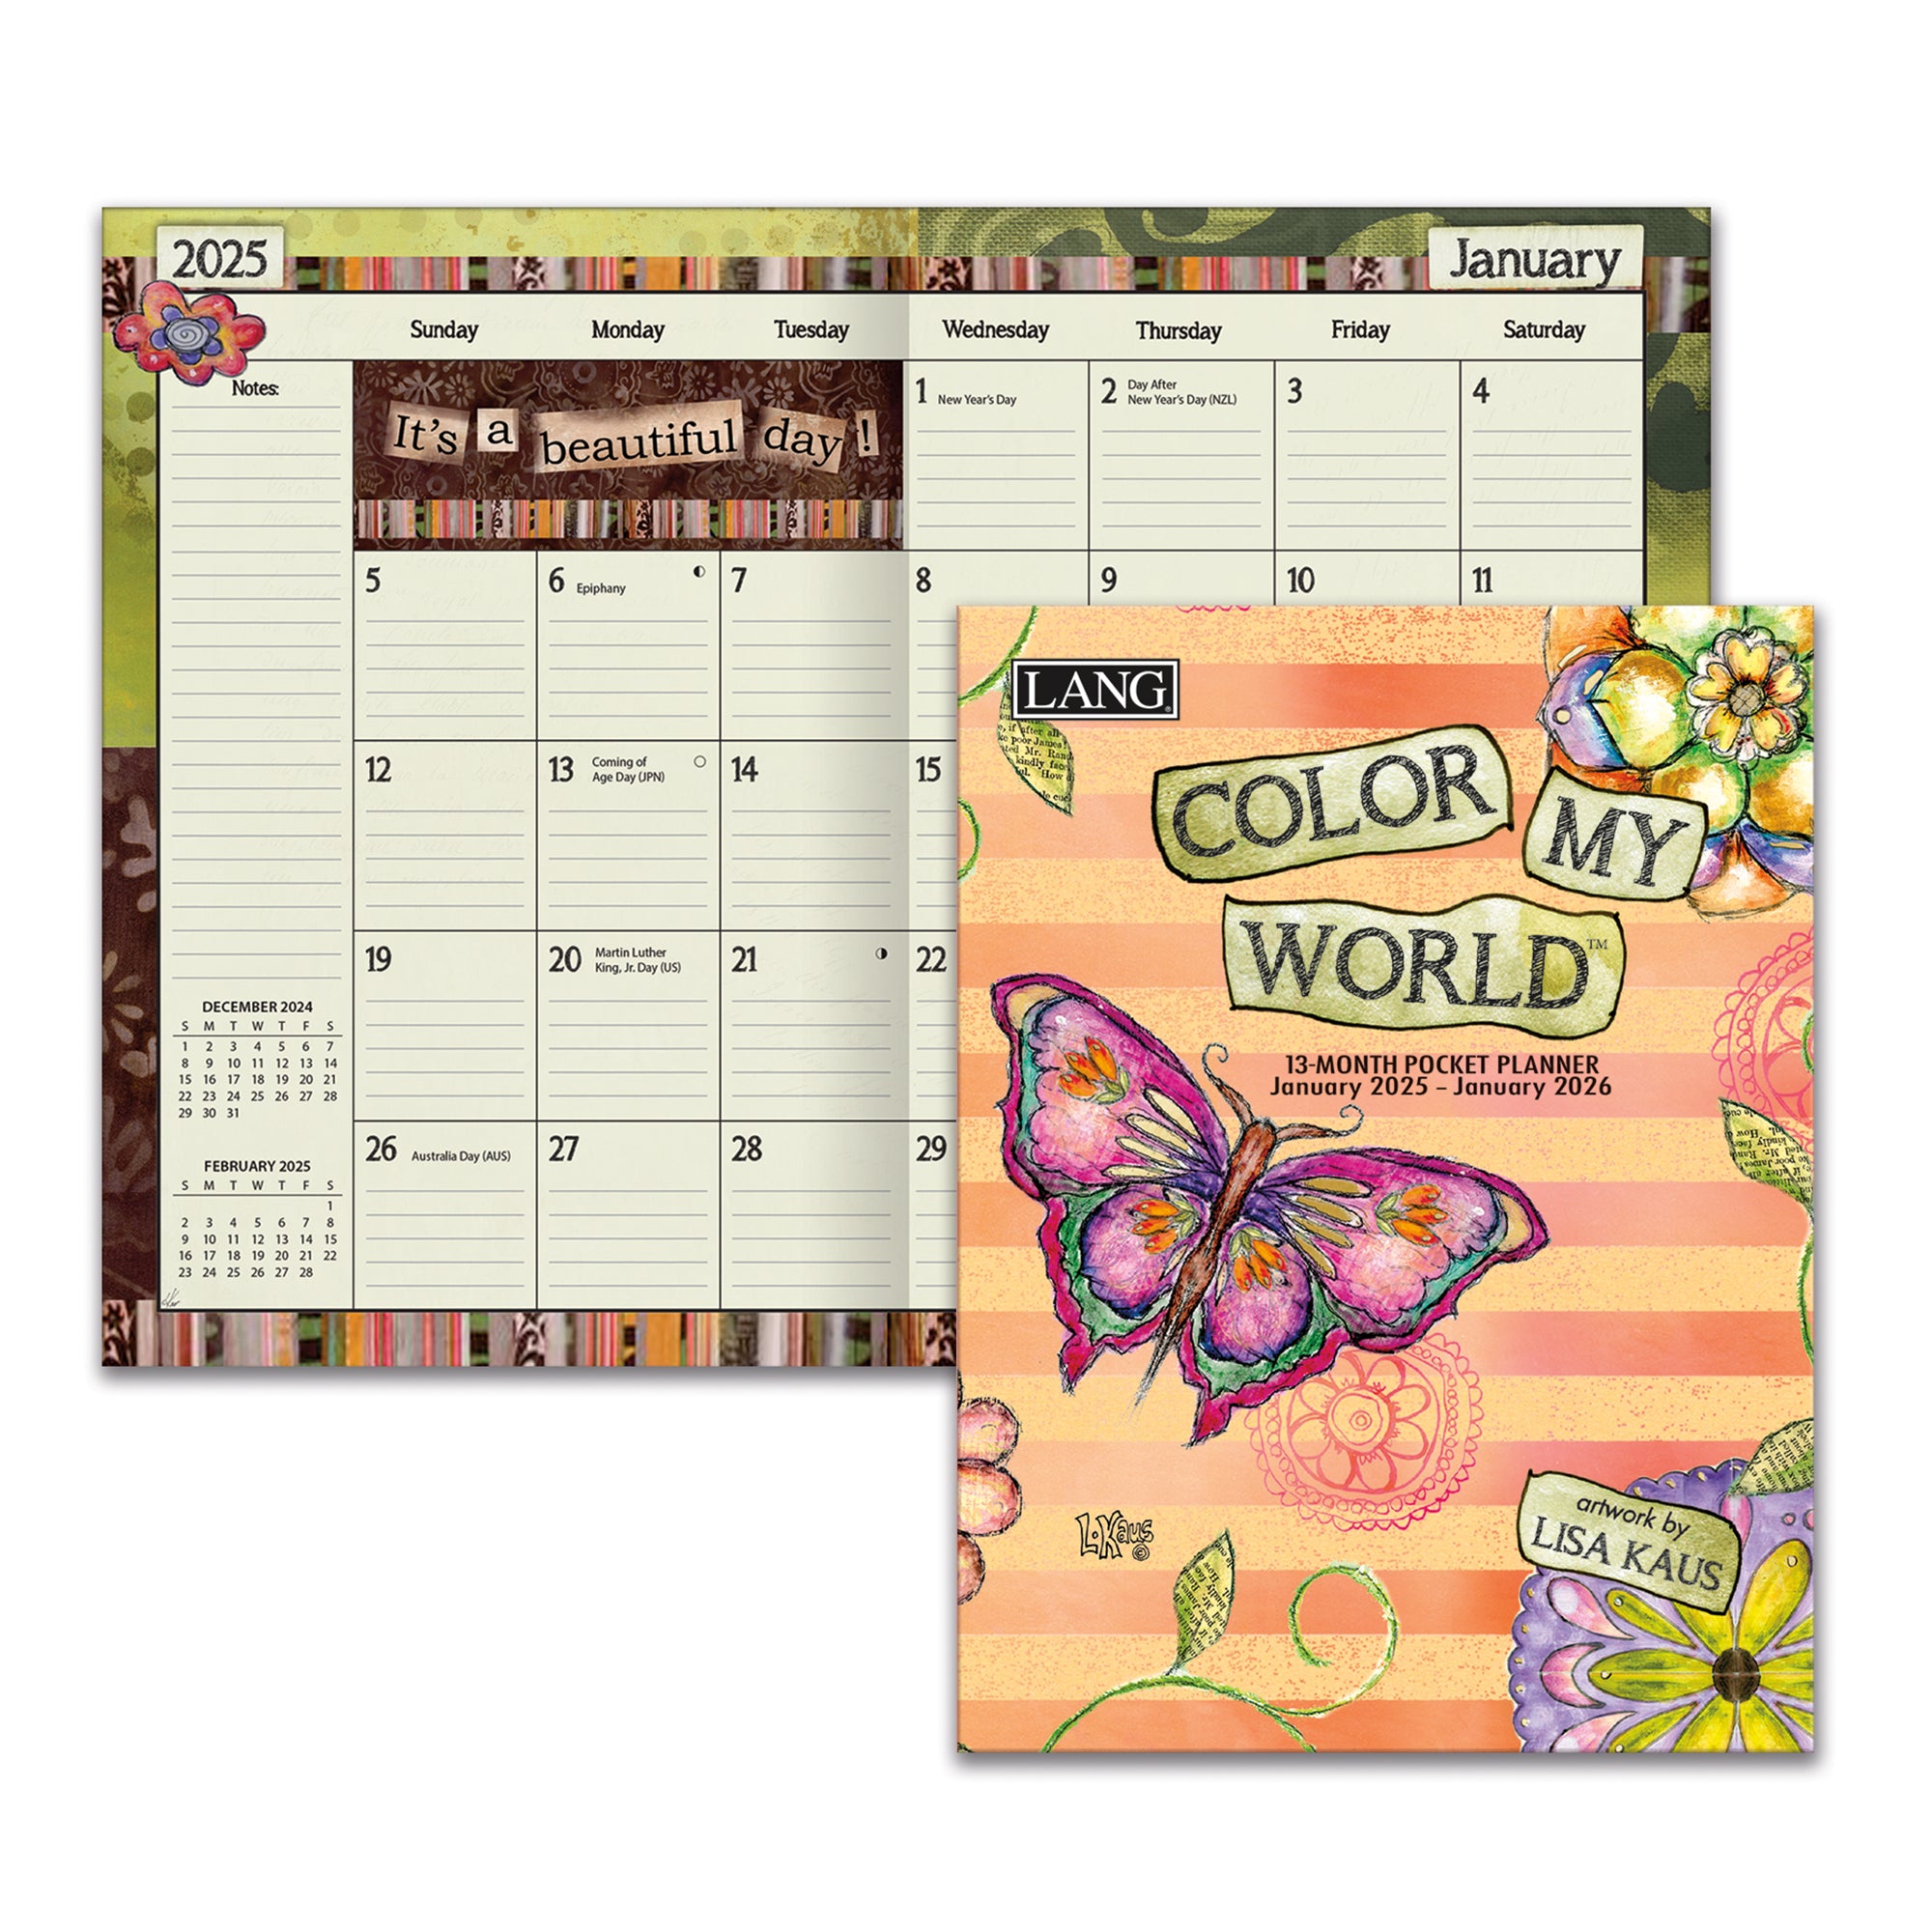 2025 Color My World - LANG 13 Month Pocket Diary/Planner